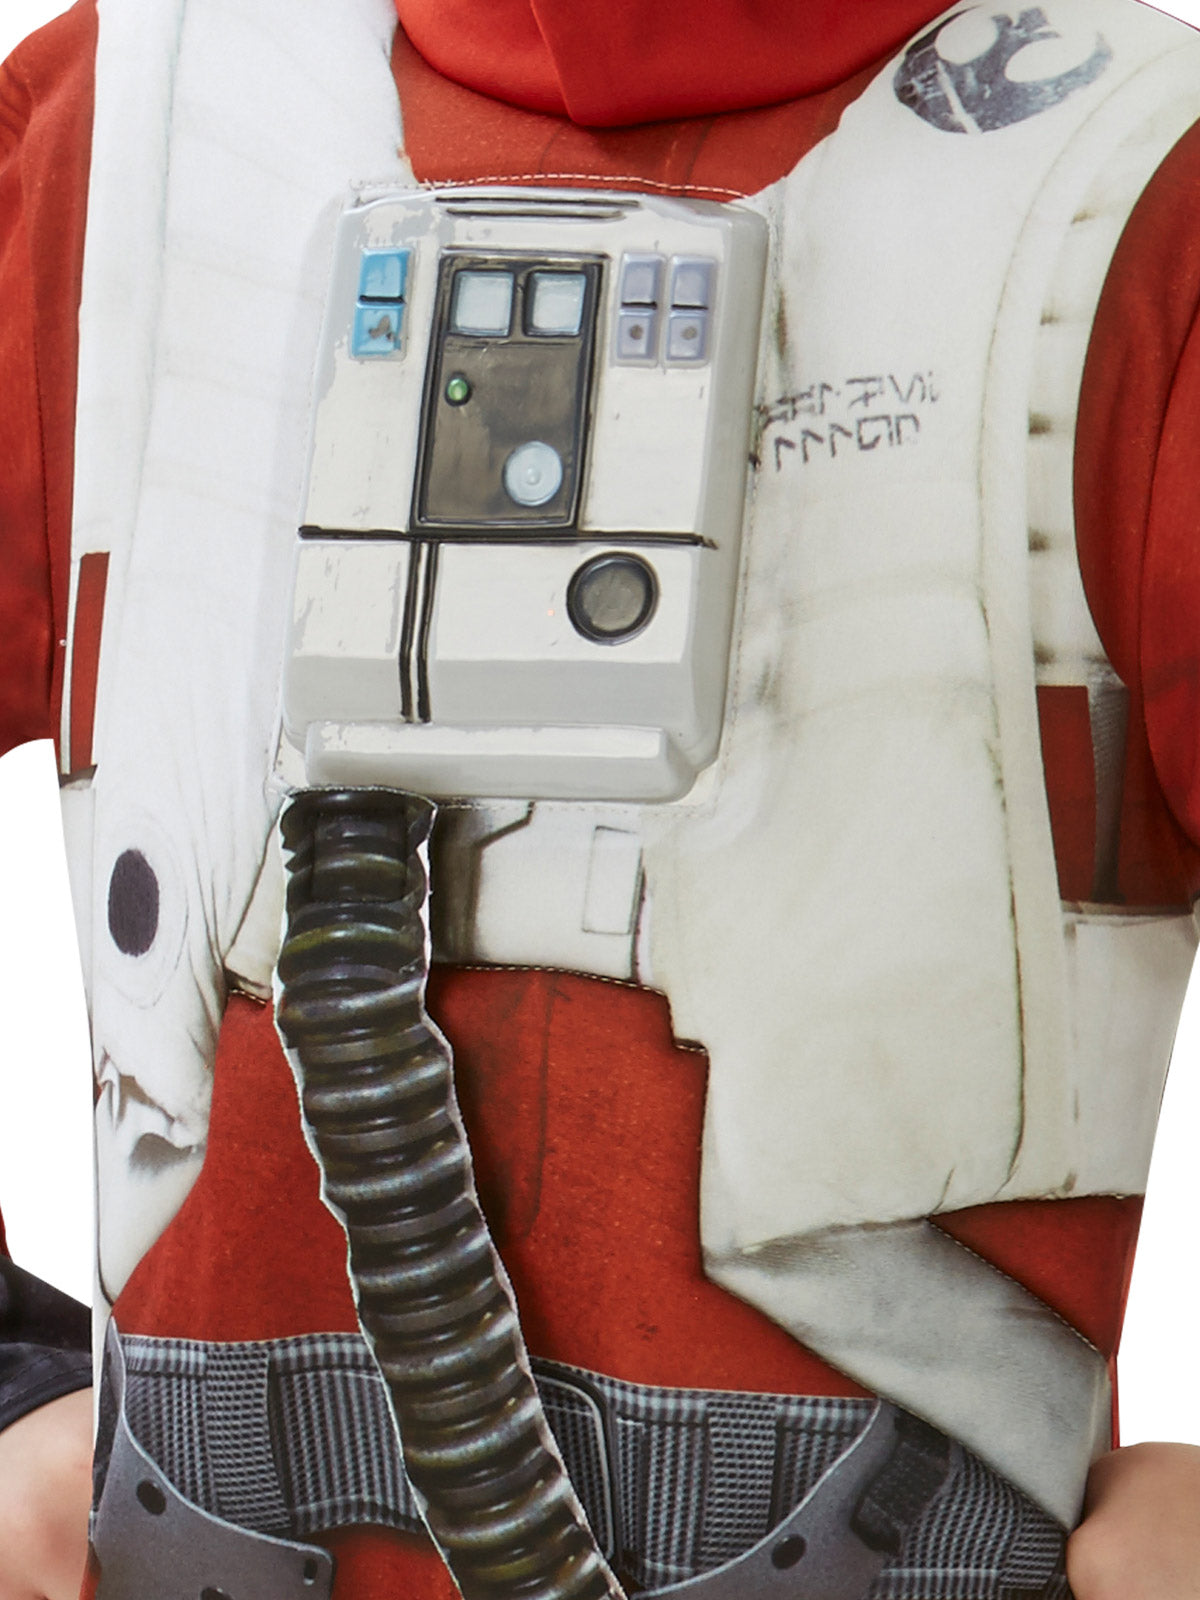 Star Wars X-Wing Fighter Deluxe Boys Costume